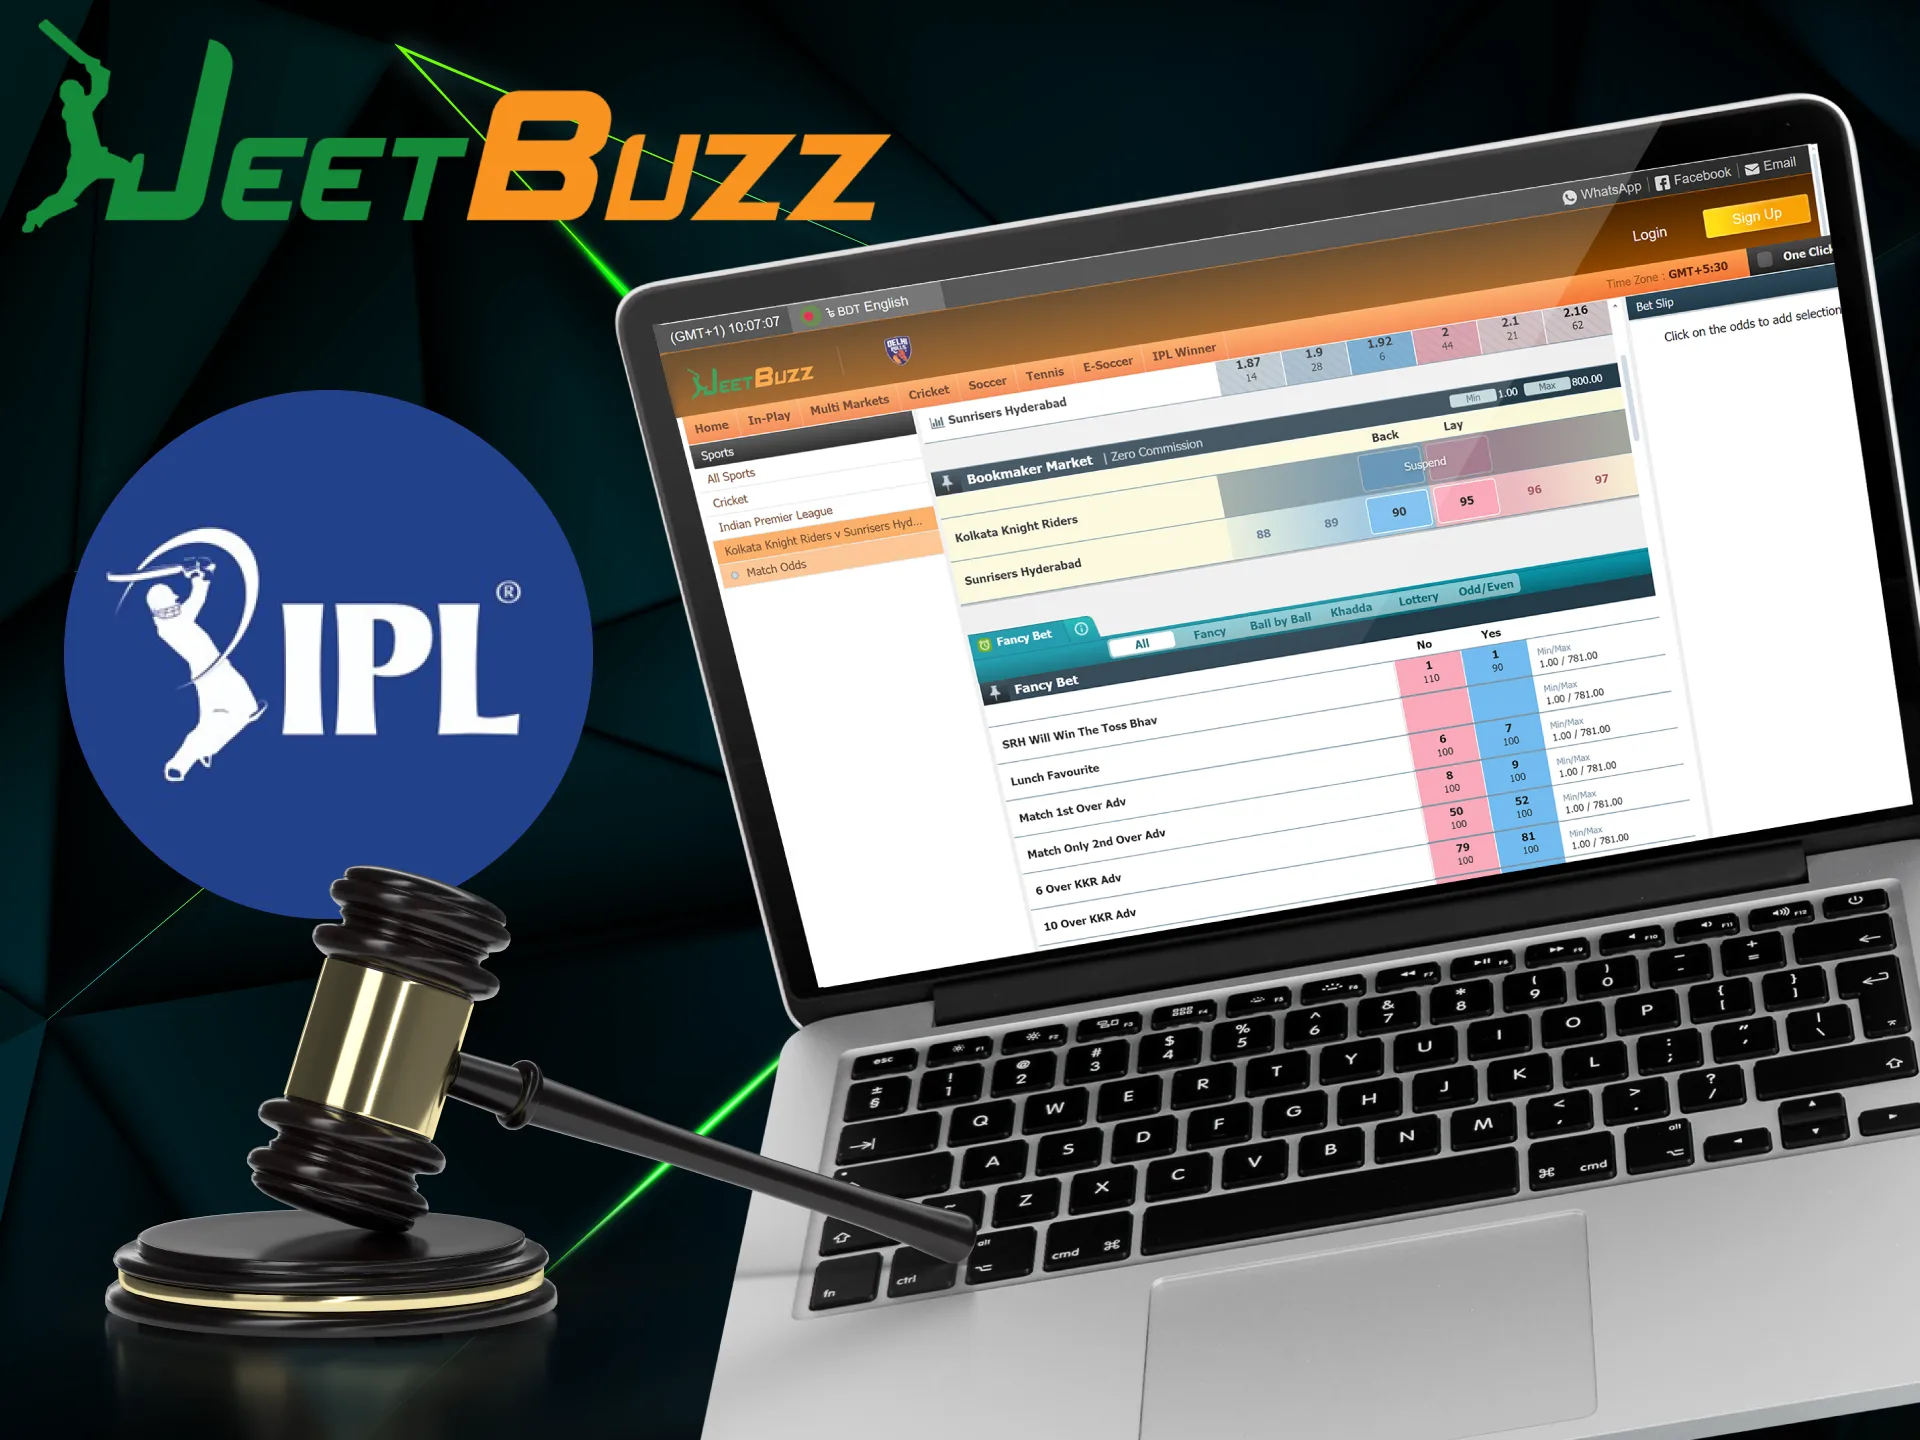 IPL betting is legal at bookmaker JeetBuzz.